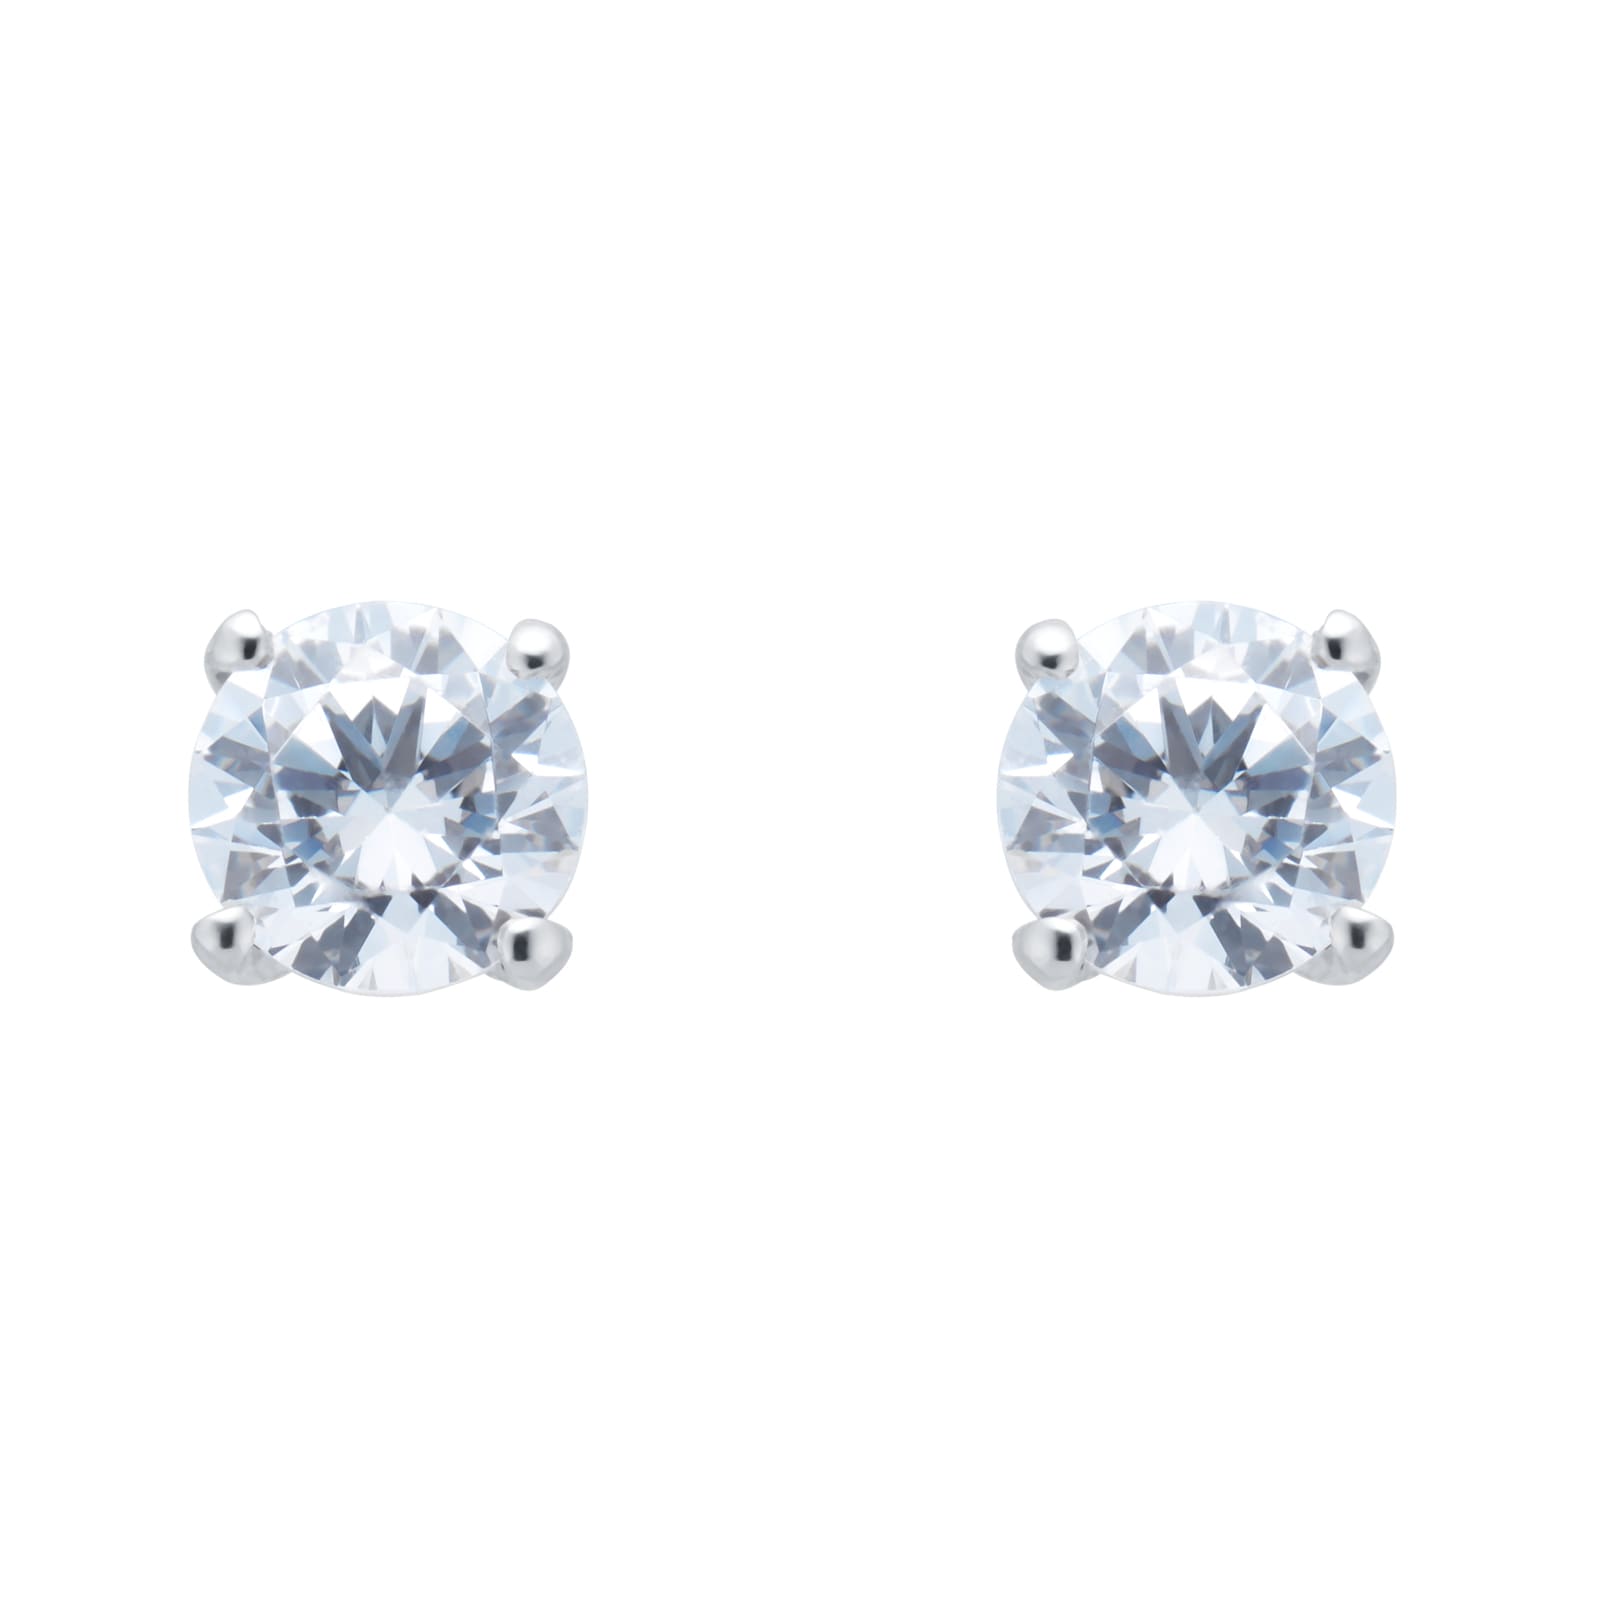 Goldsmiths 18ct White Gold 1.00cttw Solitaire Stud Earrings EX3153 ...